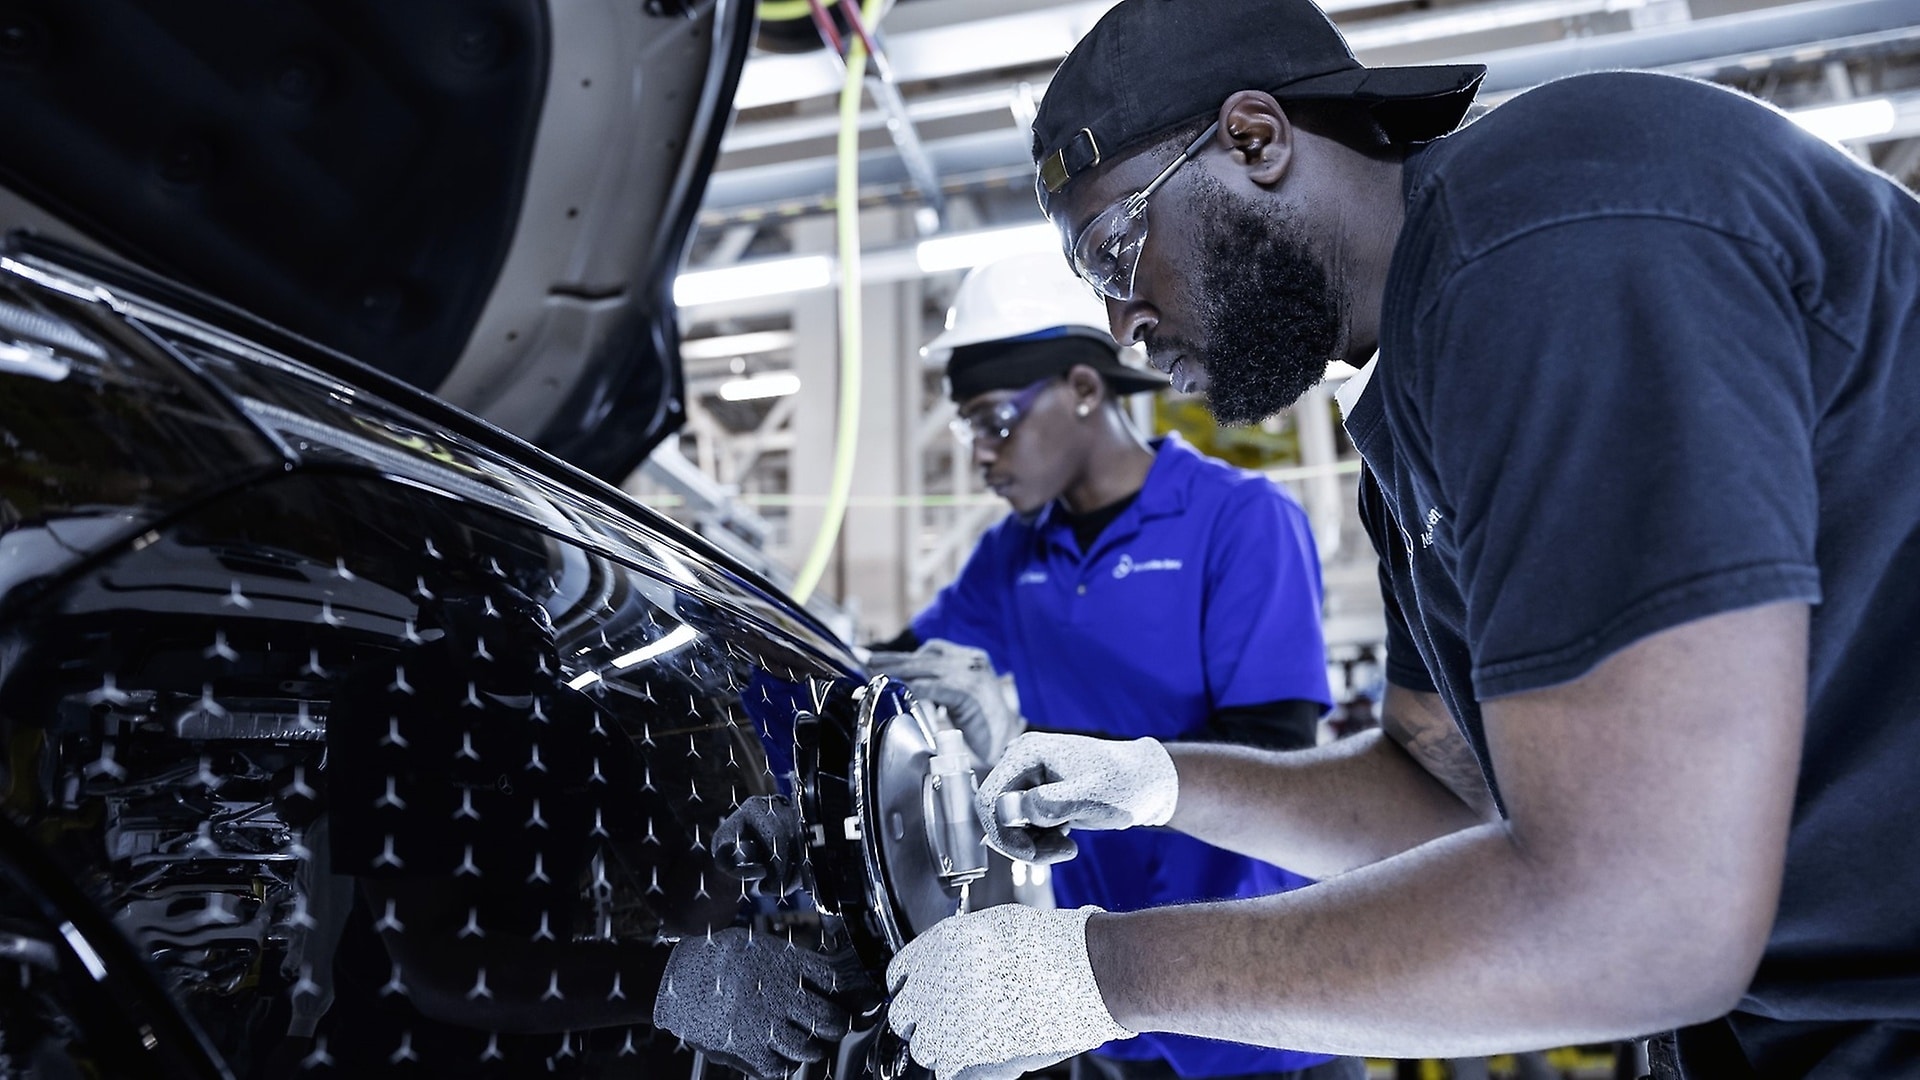 Start of Production for the new EQS SUV in Tuscaloosa, Alabama, USA.